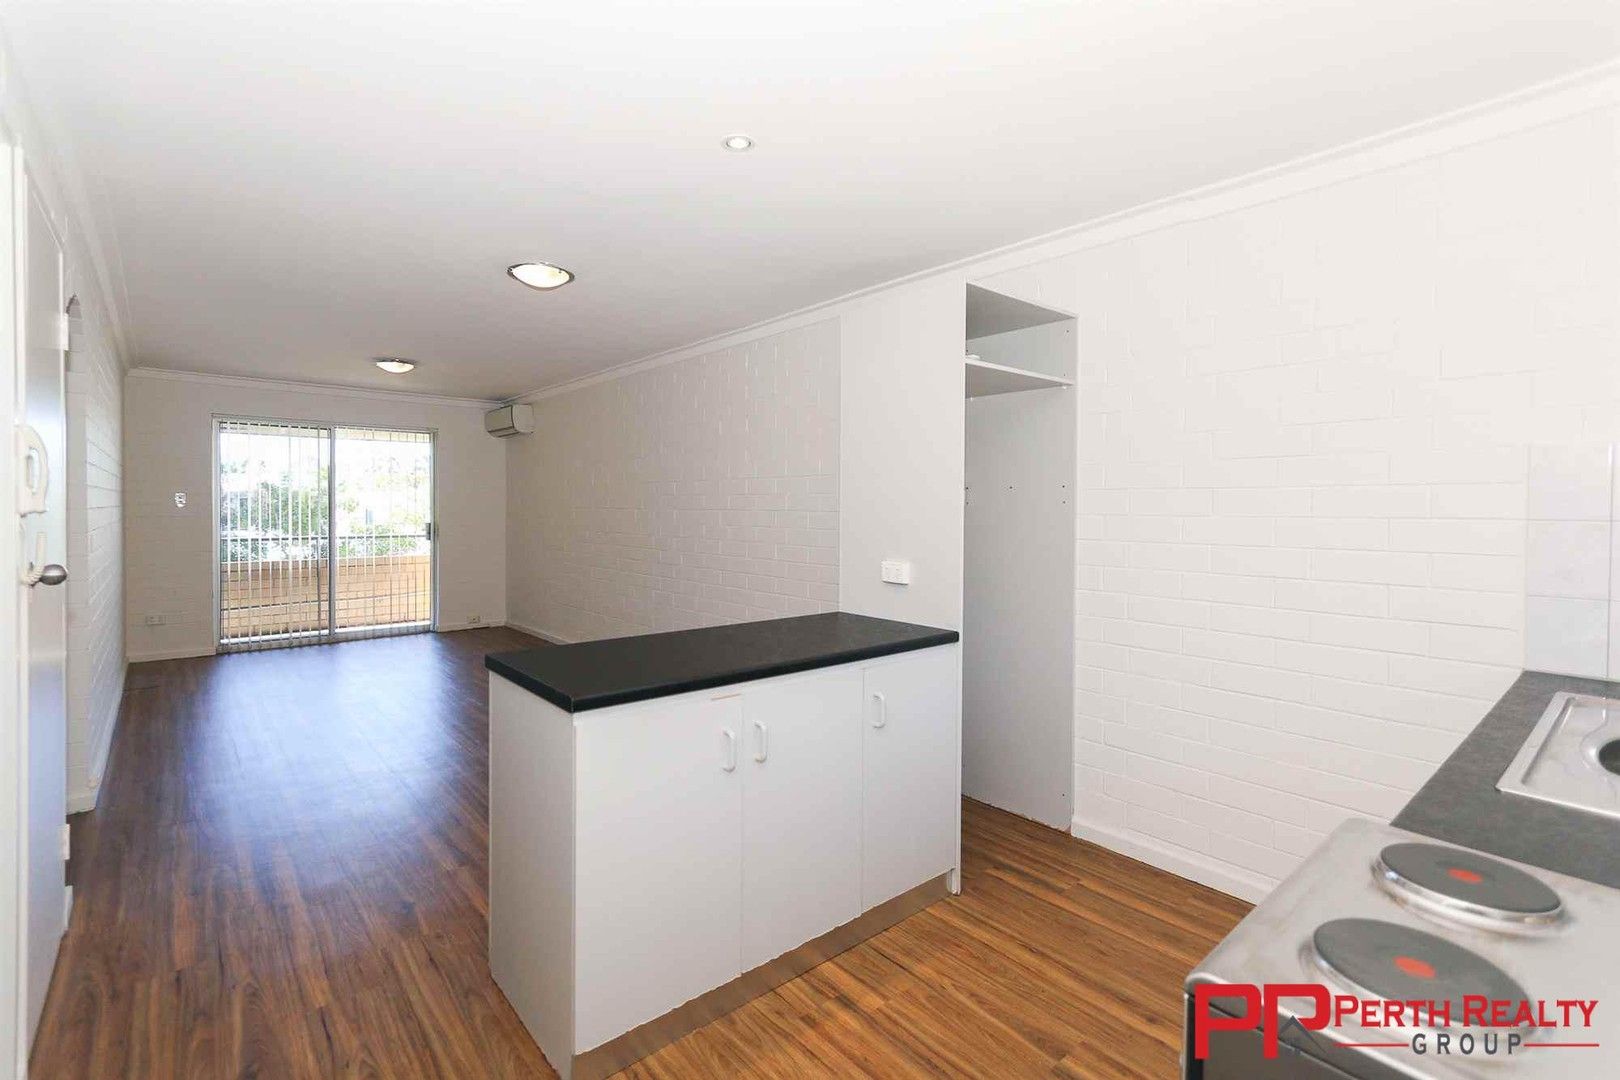 2 bedrooms Apartment / Unit / Flat in 32/5 Kathleen Avenue MAYLANDS WA, 6051